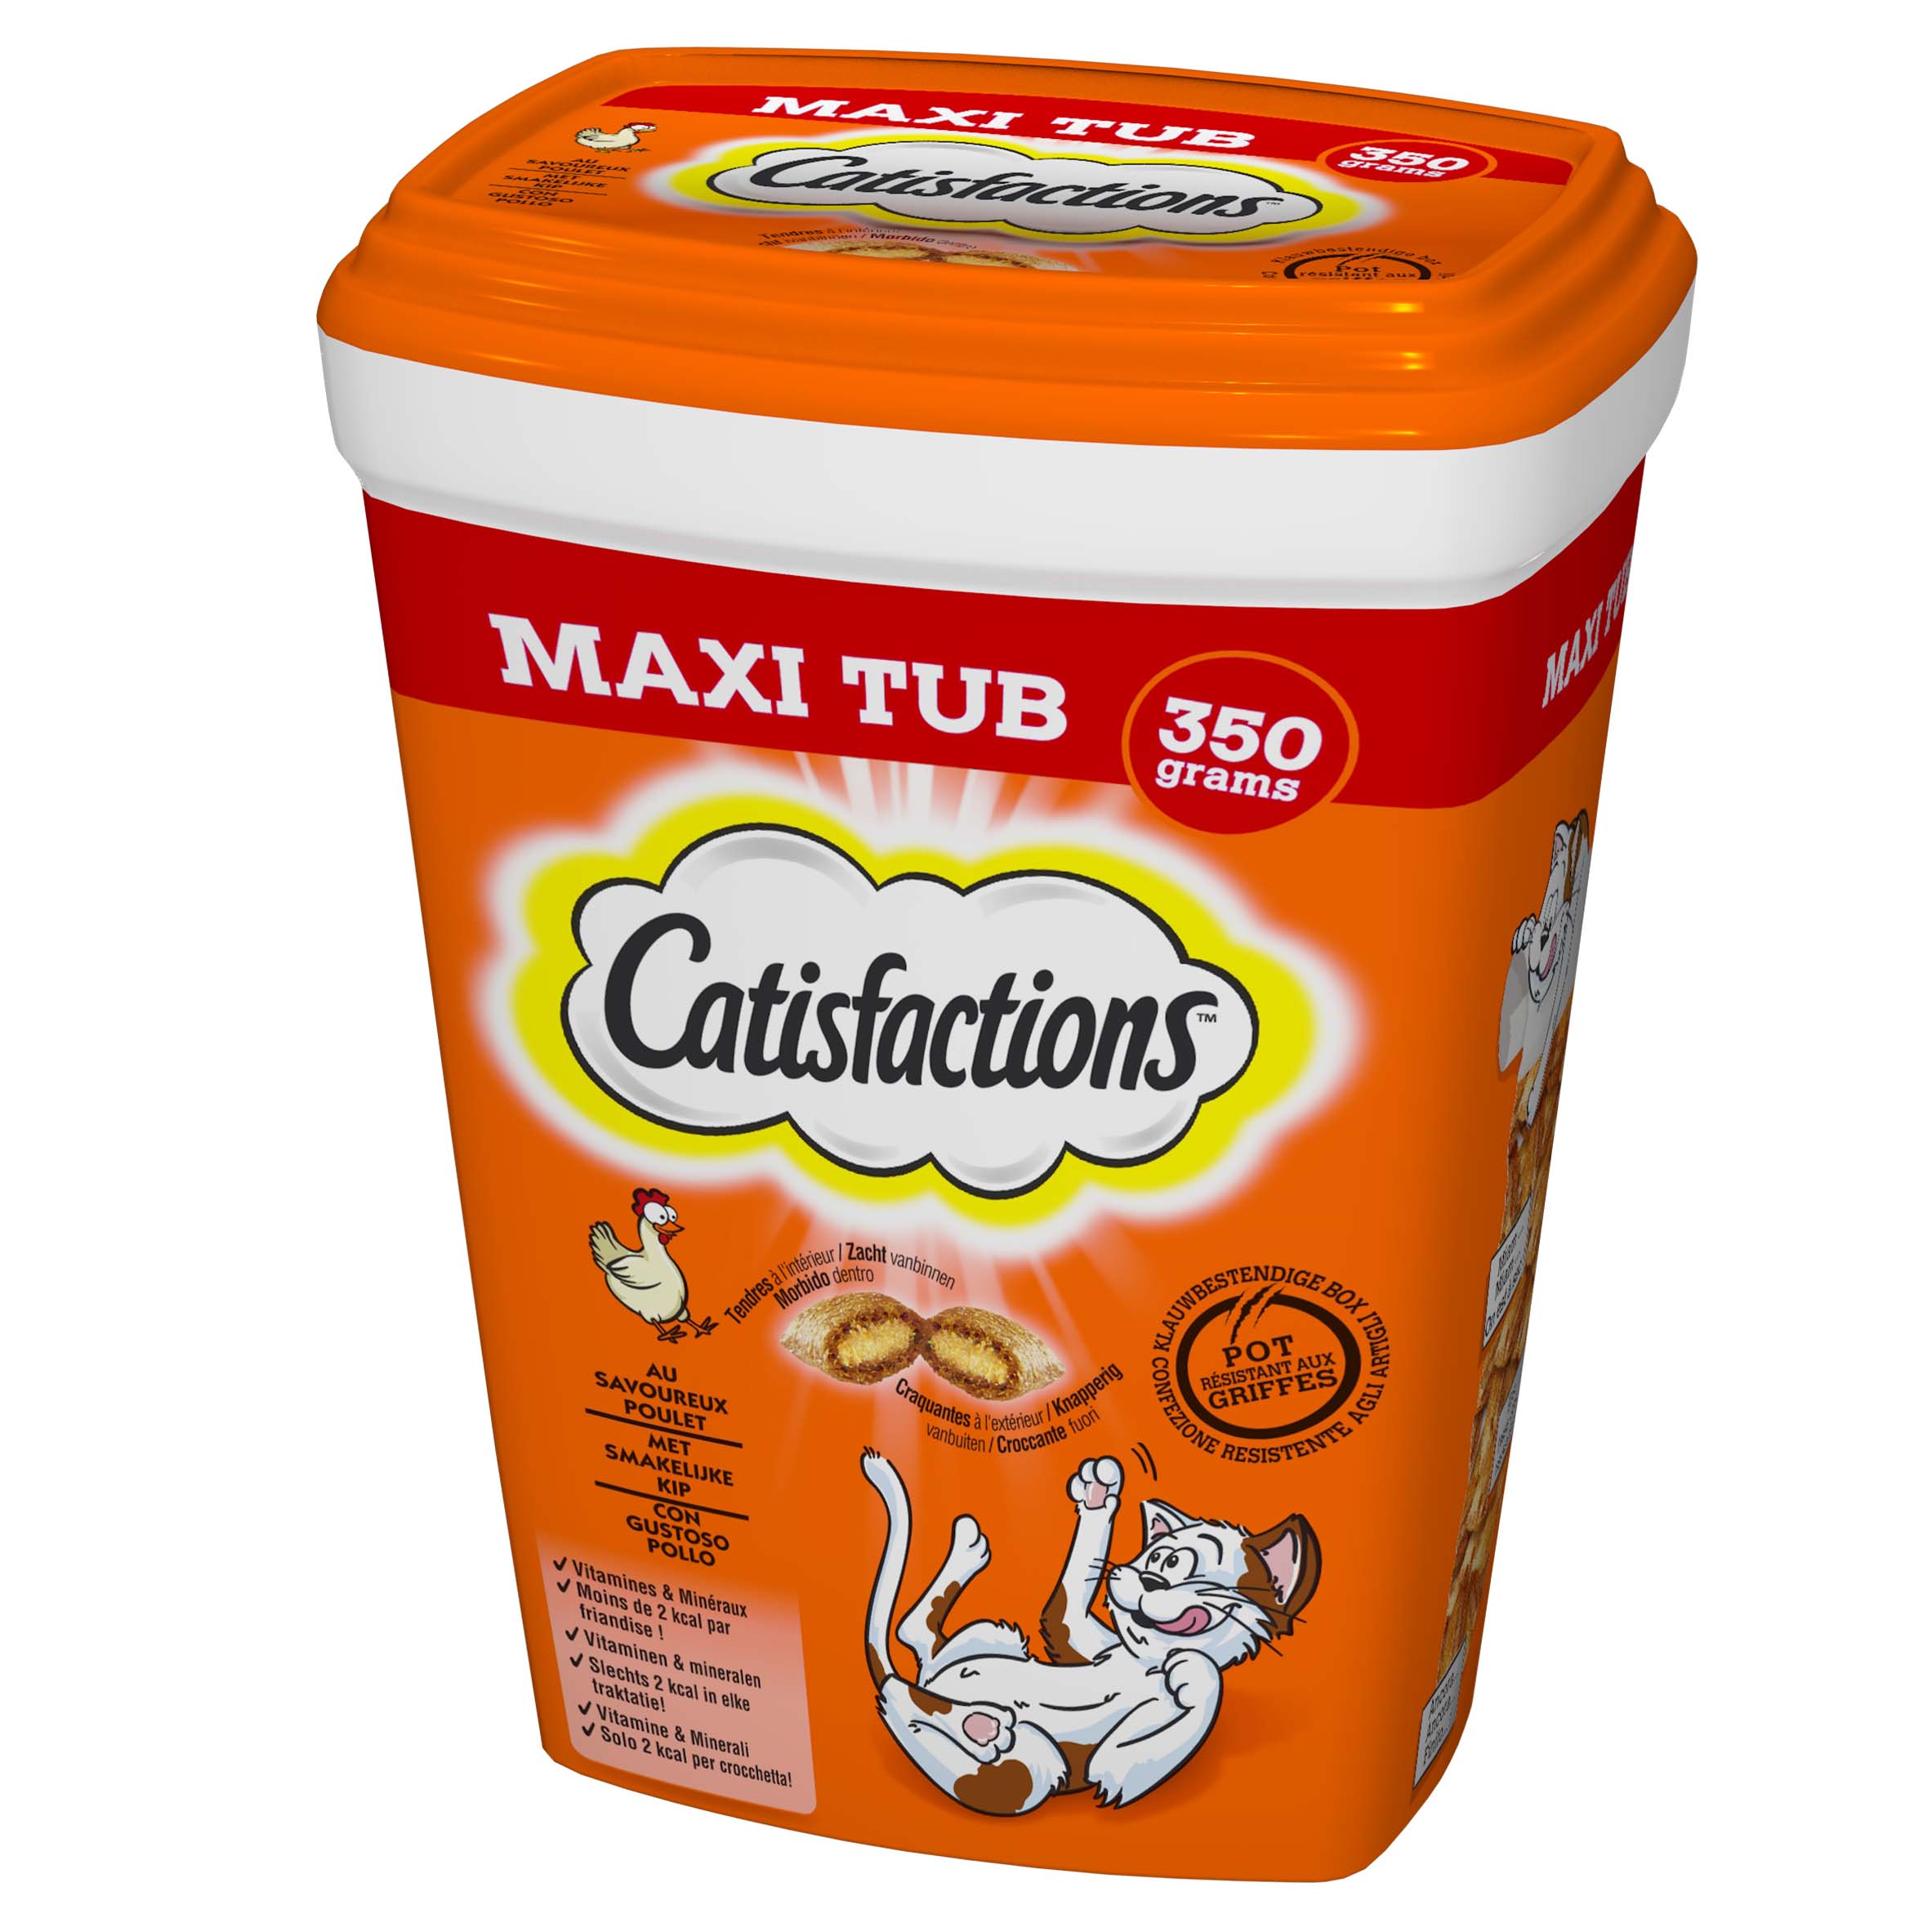 CATISFACTIONS TUB POULET 350G 